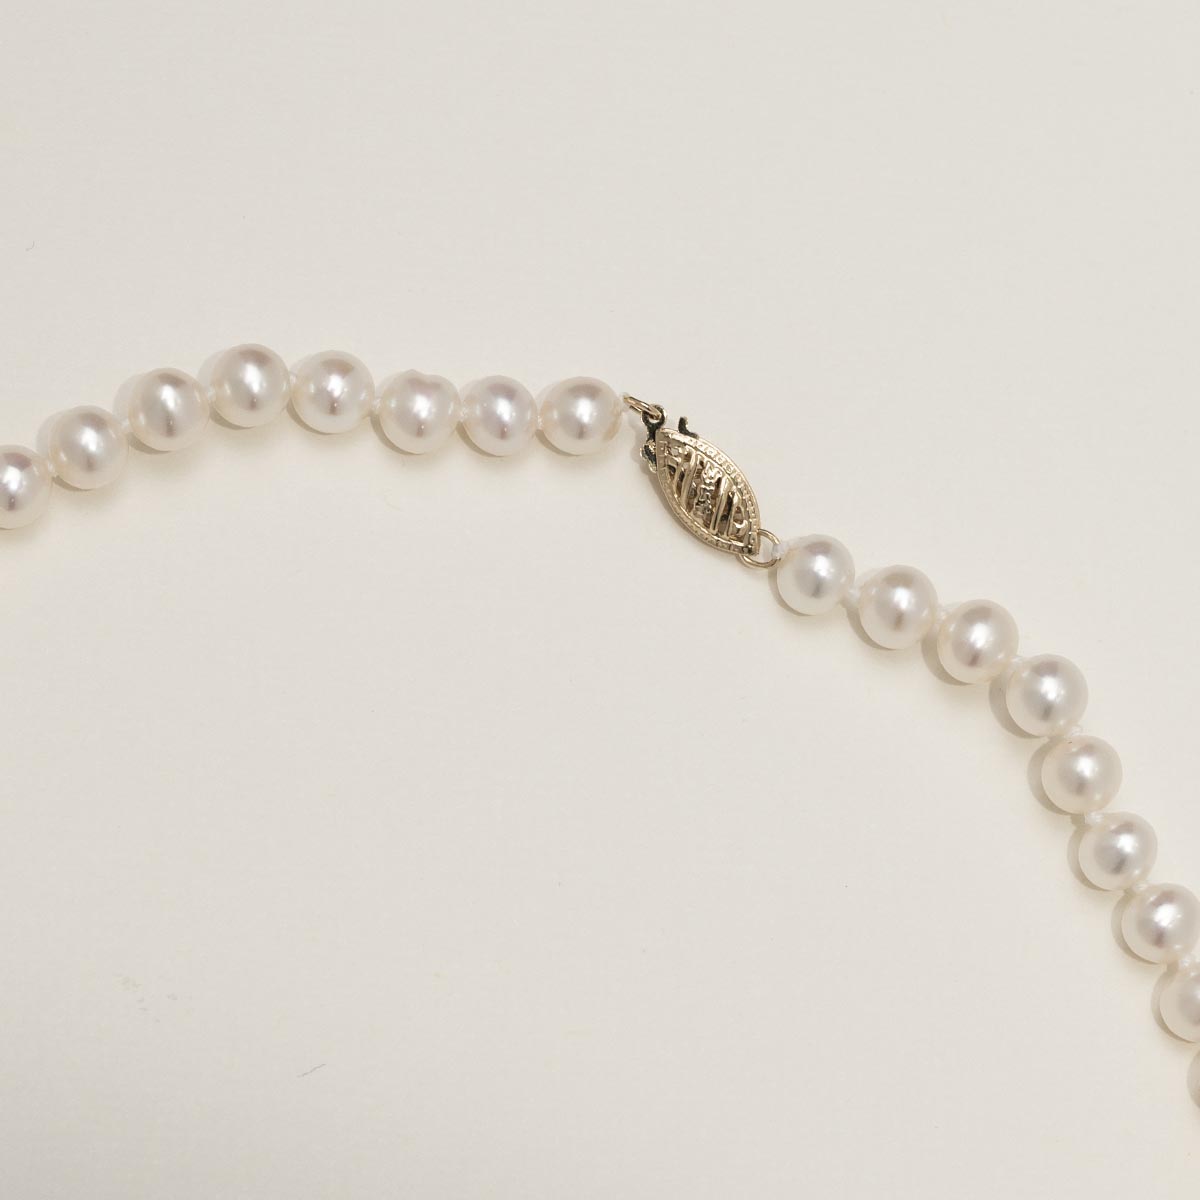 Mastoloni Cultured Freshwater Pearl Strand Necklace in 14kt Yellow Gold (5.5-6mm pearls)